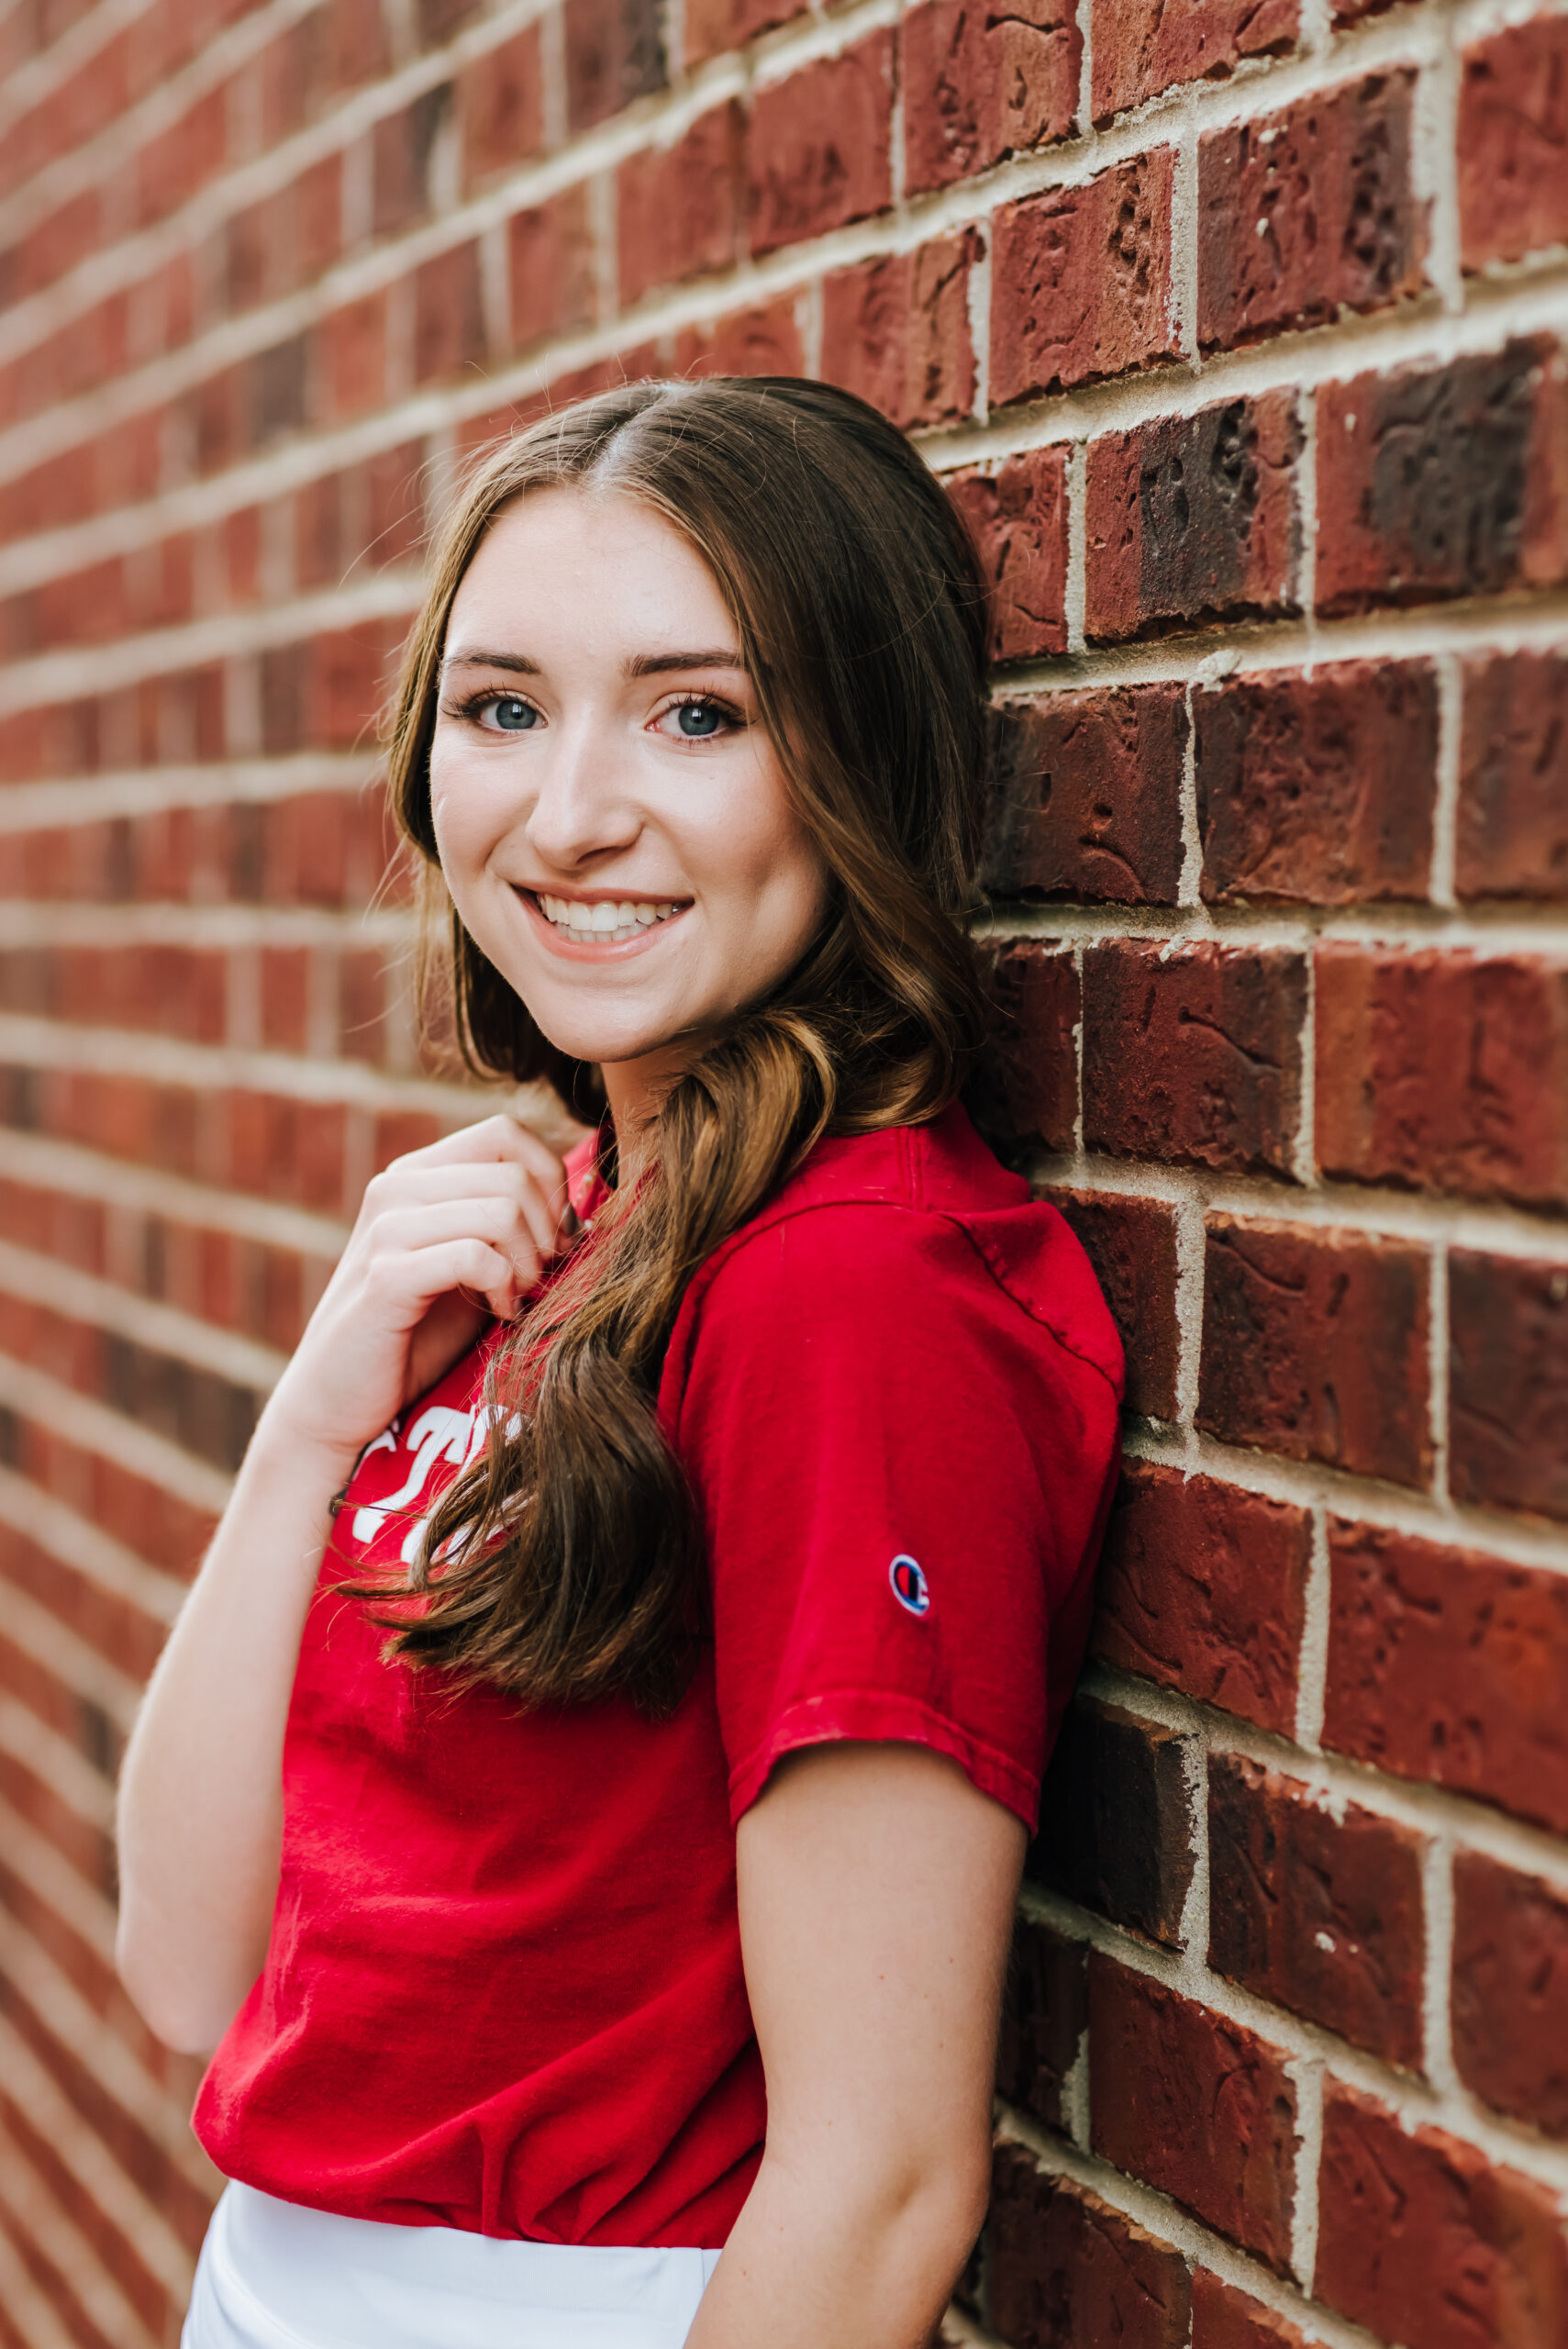 A high school senior in a red shirt smiles while leaning against a brick wall